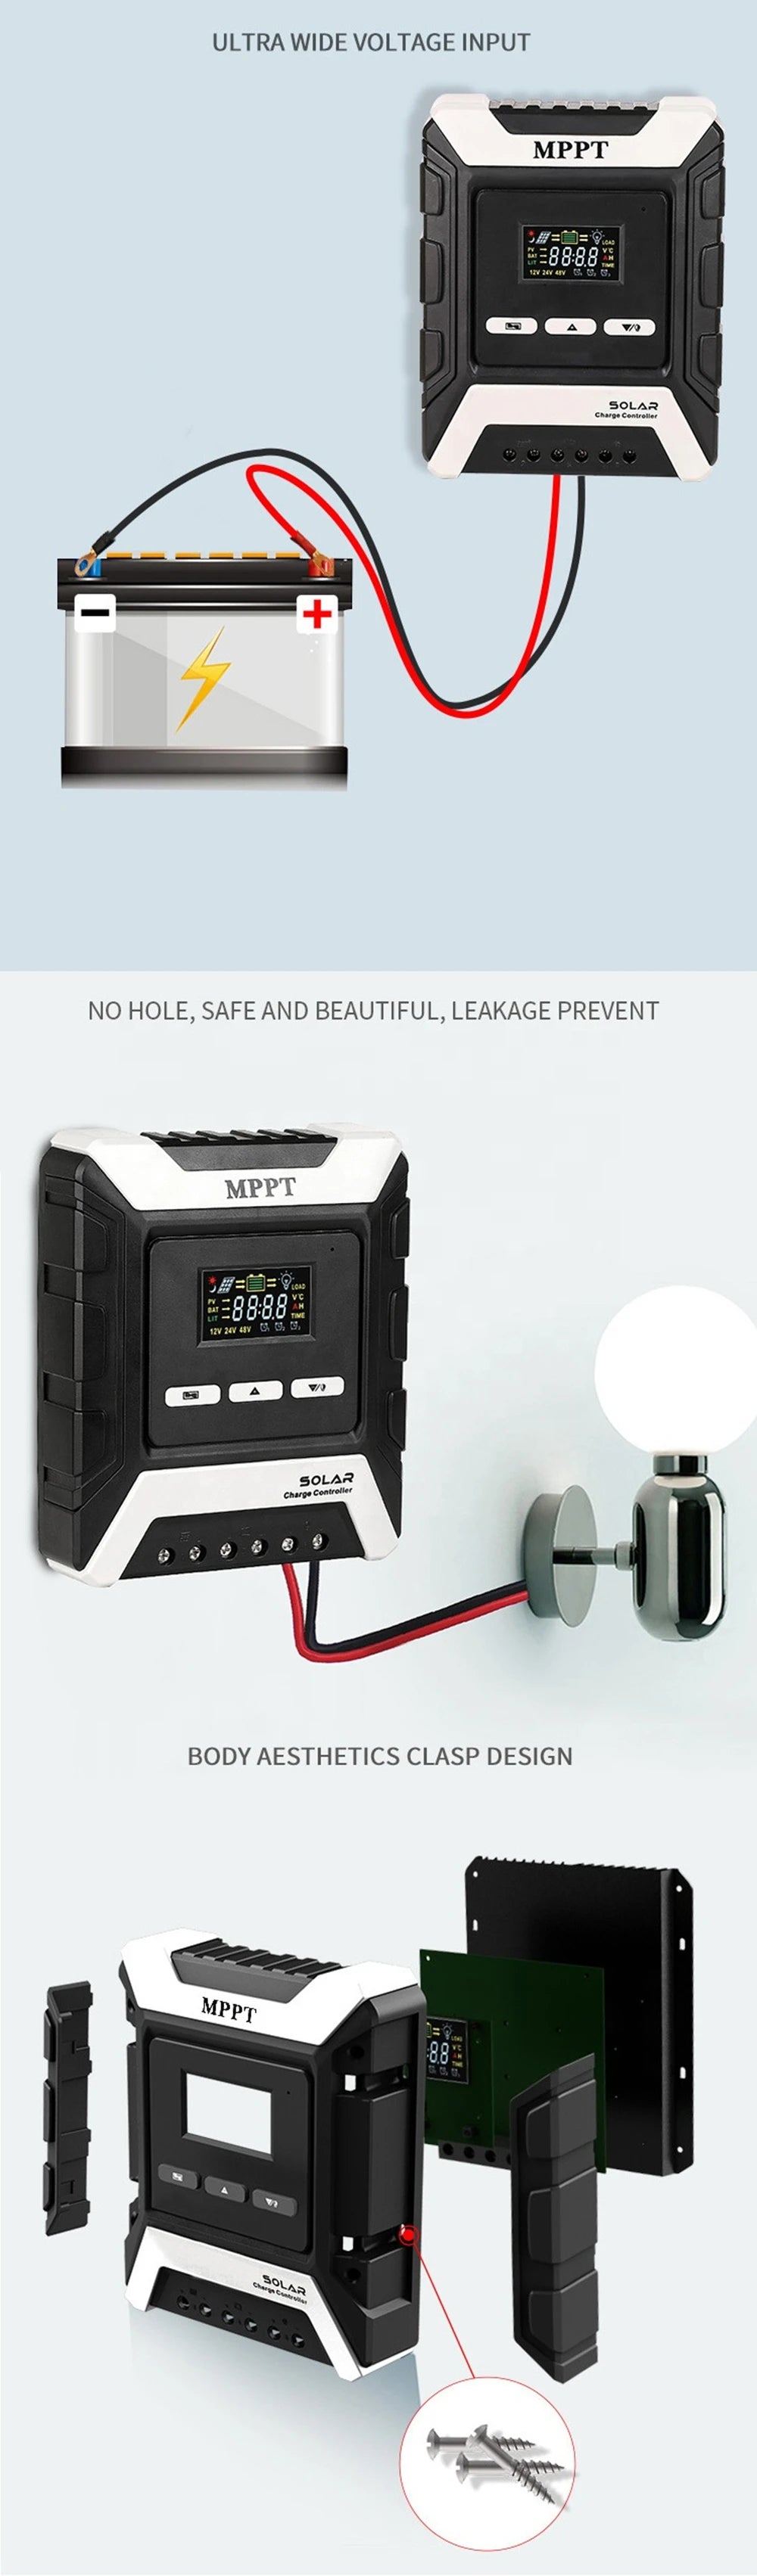 MPPT Solar Charge Controller, Safe and stylish solar charger with wide voltage input, no holes, and easy installation for various battery types.